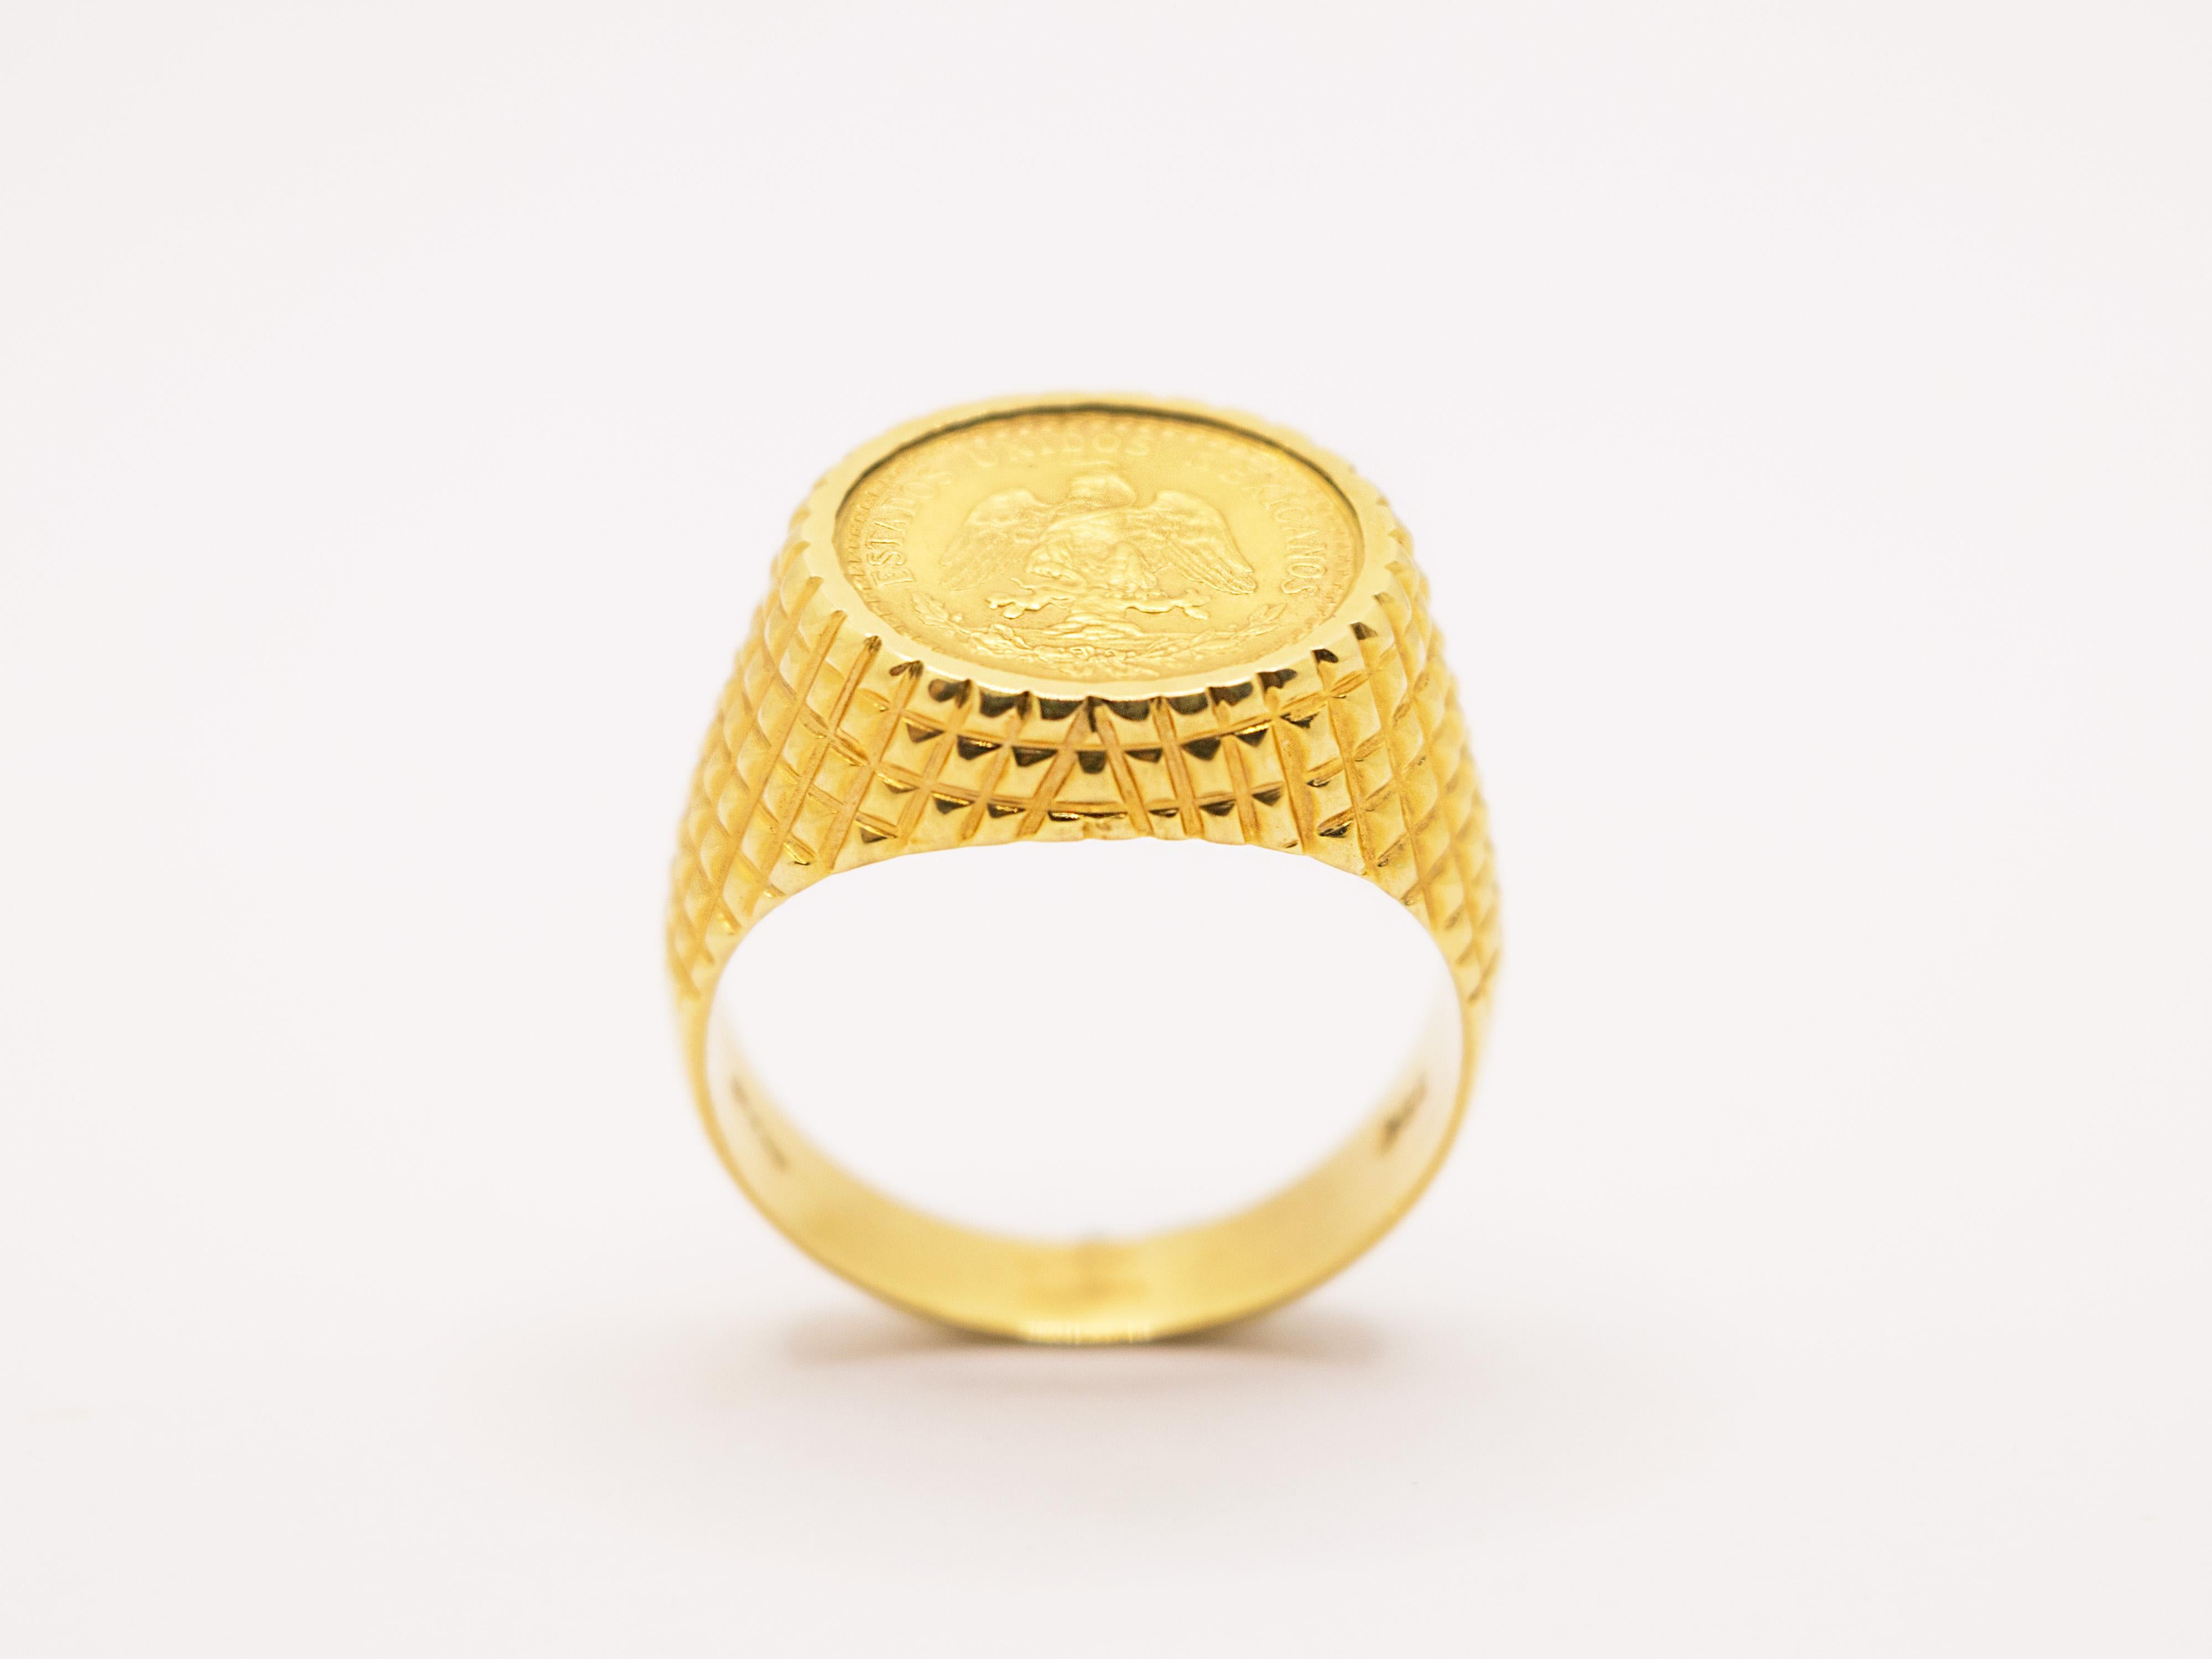 A classic 18kt yellow gold chevalier ring set with a Mexican Dos Pesos coin.
This ring can be worn either as a pinky ring or as a ring finger or middle finger ring.
It can be easily widened or tightened to size.
It has beautiful brickwork, a design